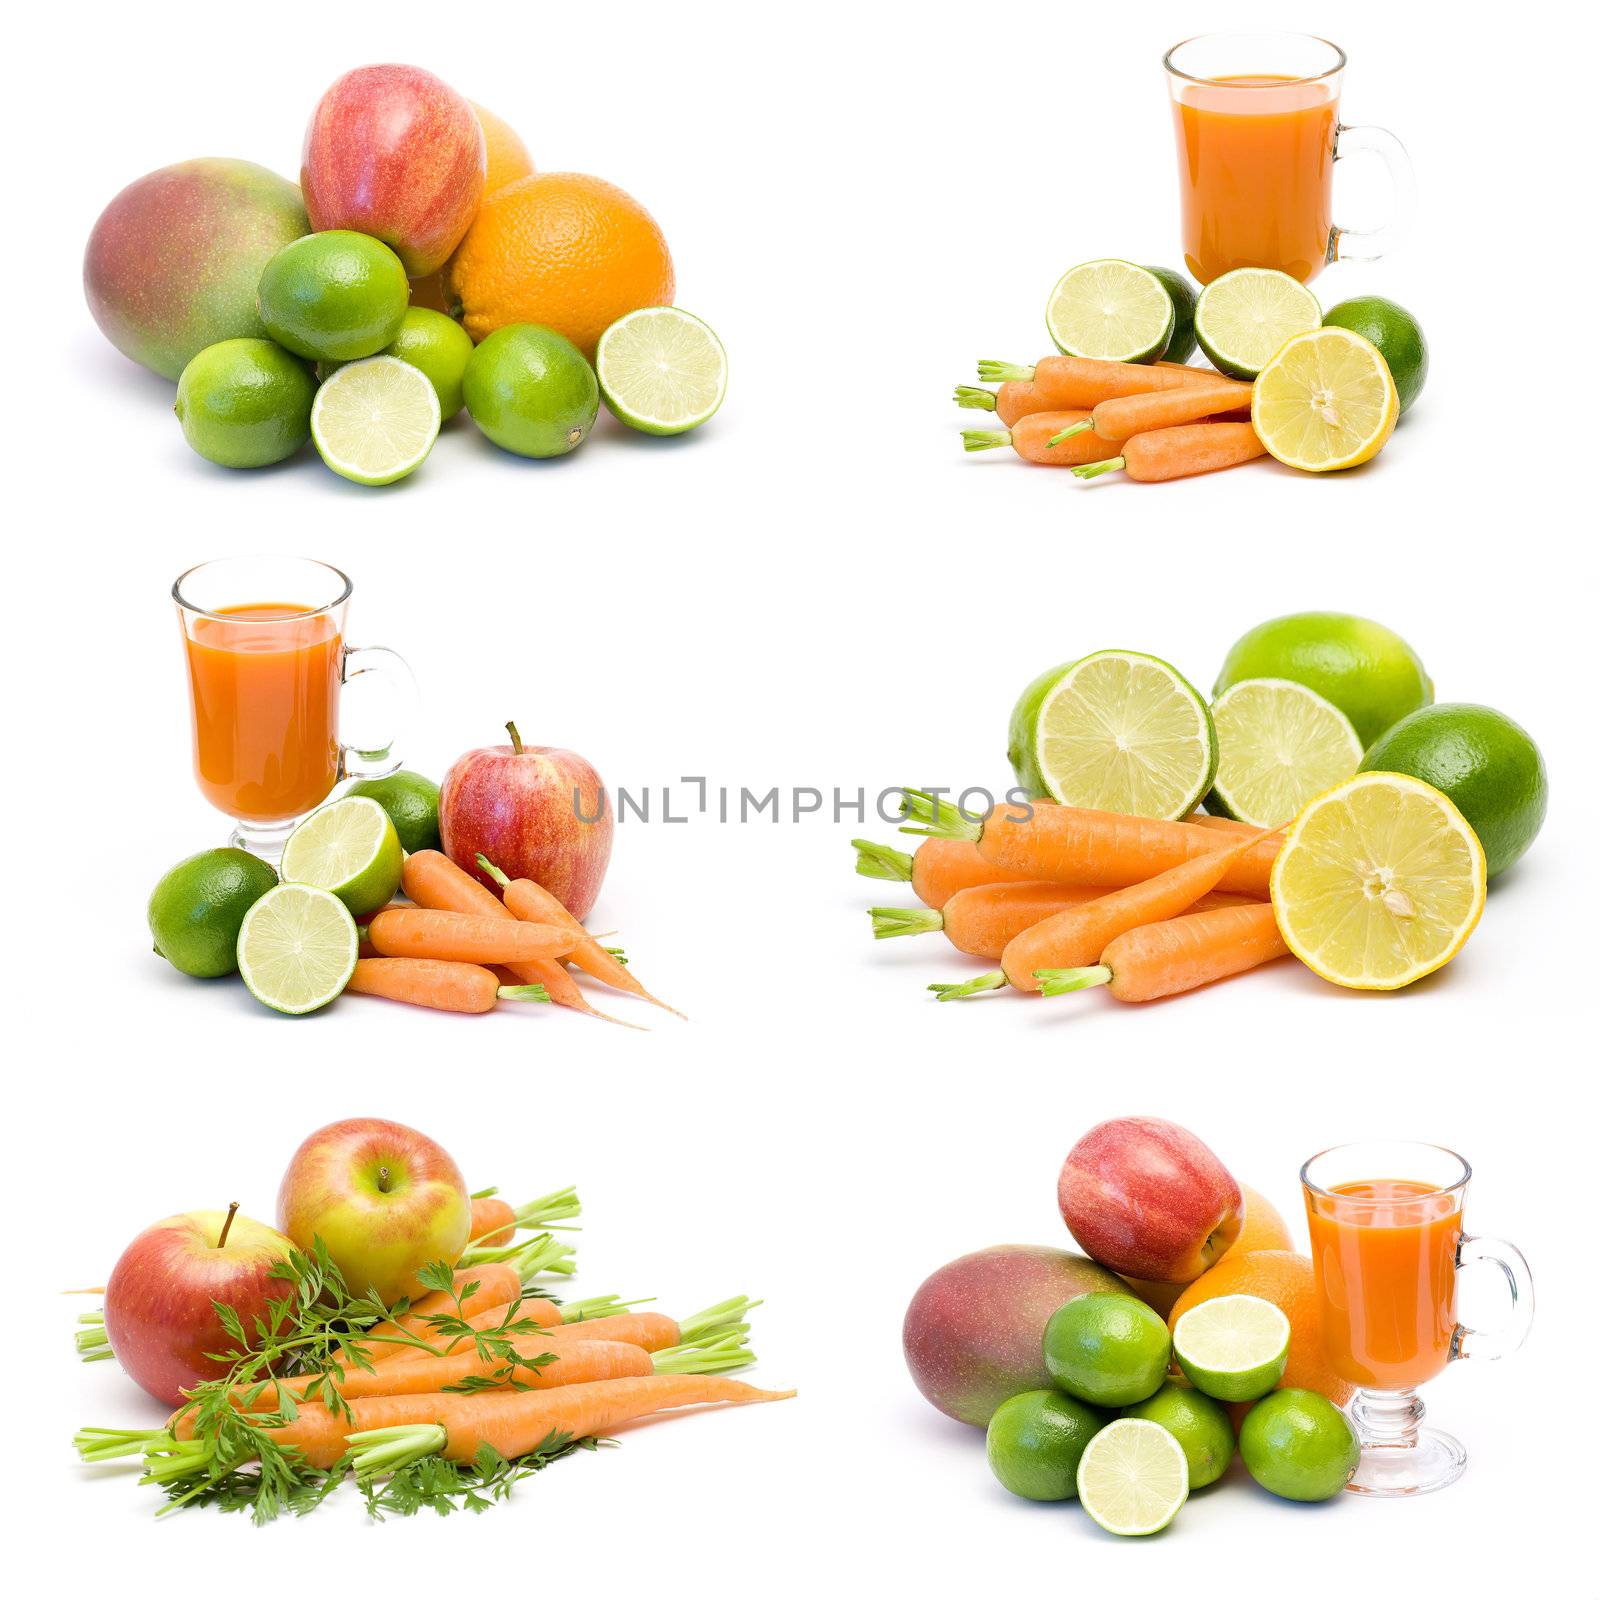 fresh juice, fruits and vegetables - collage by miradrozdowski